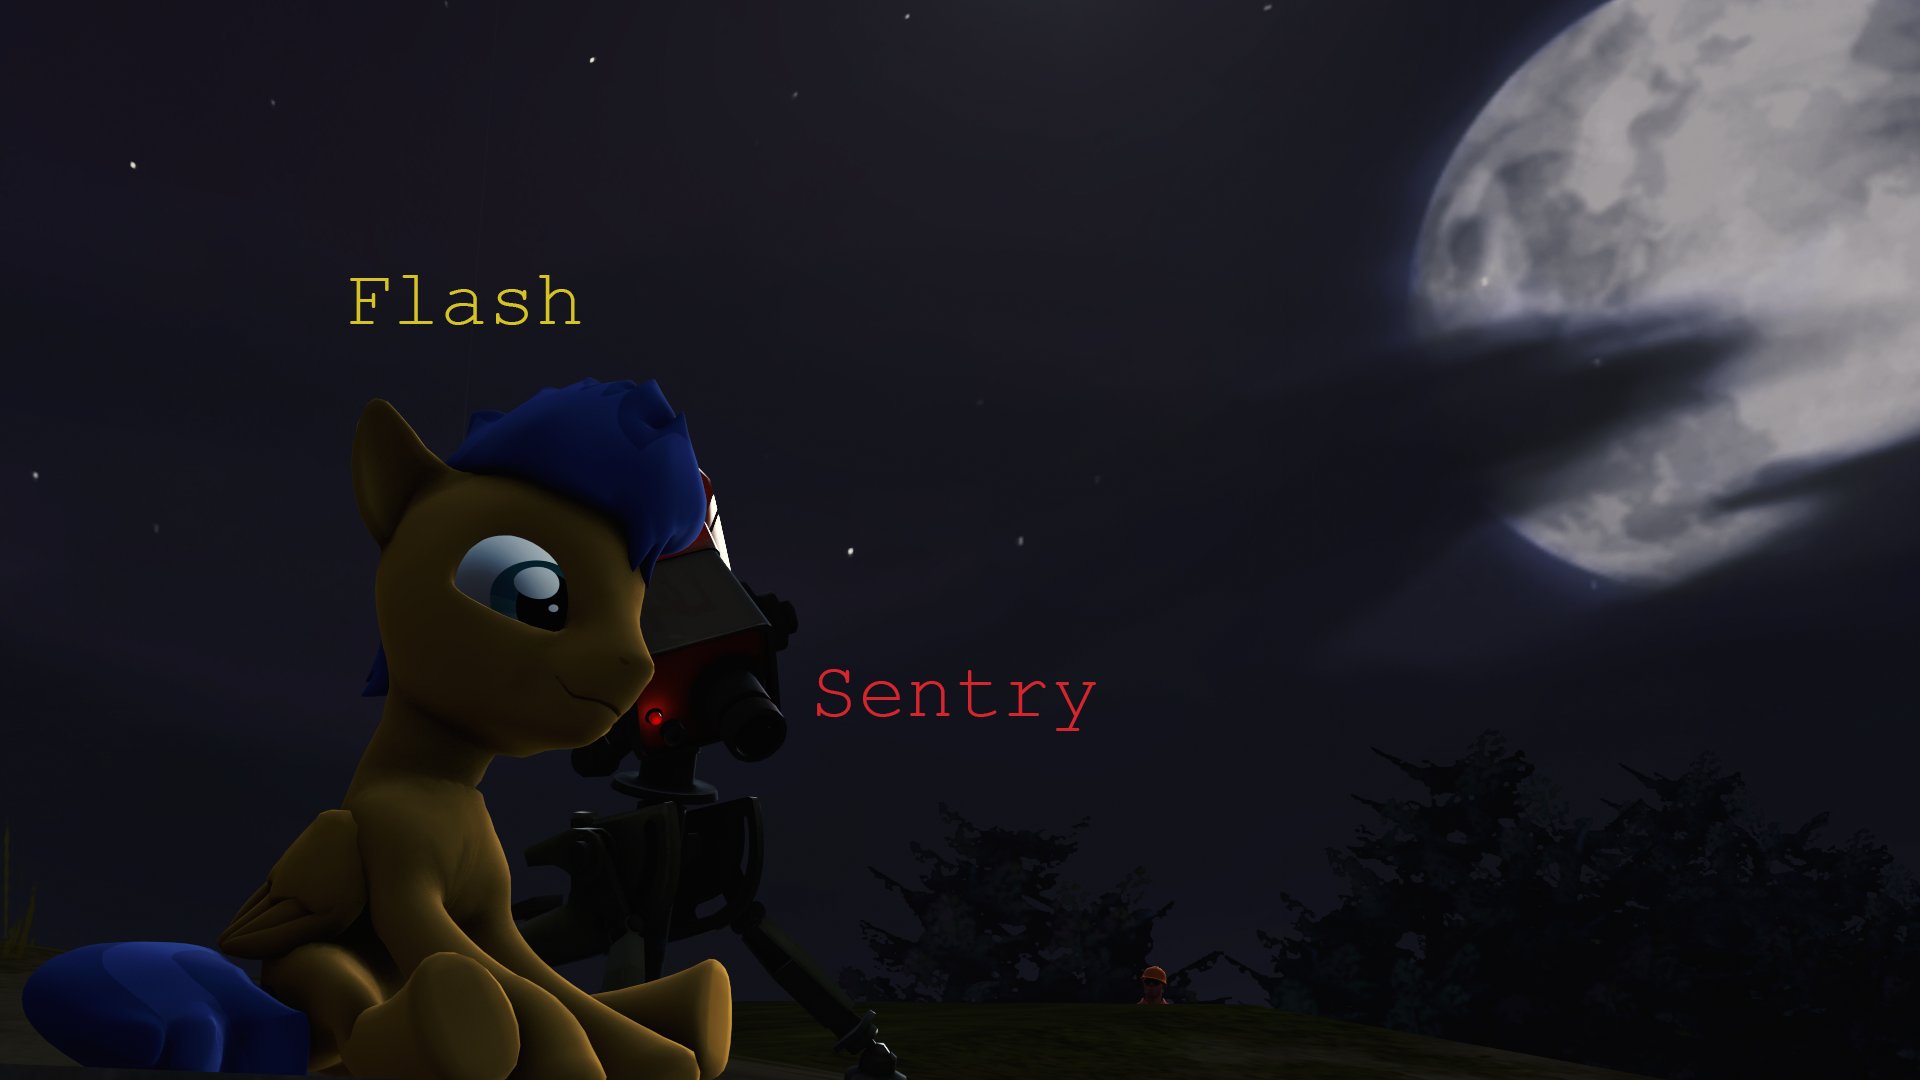 Sentry hosted. Muscle growth флеш сентри. Flash Sentry muscle. Обсерв и сентри. Моды на сентри 12.